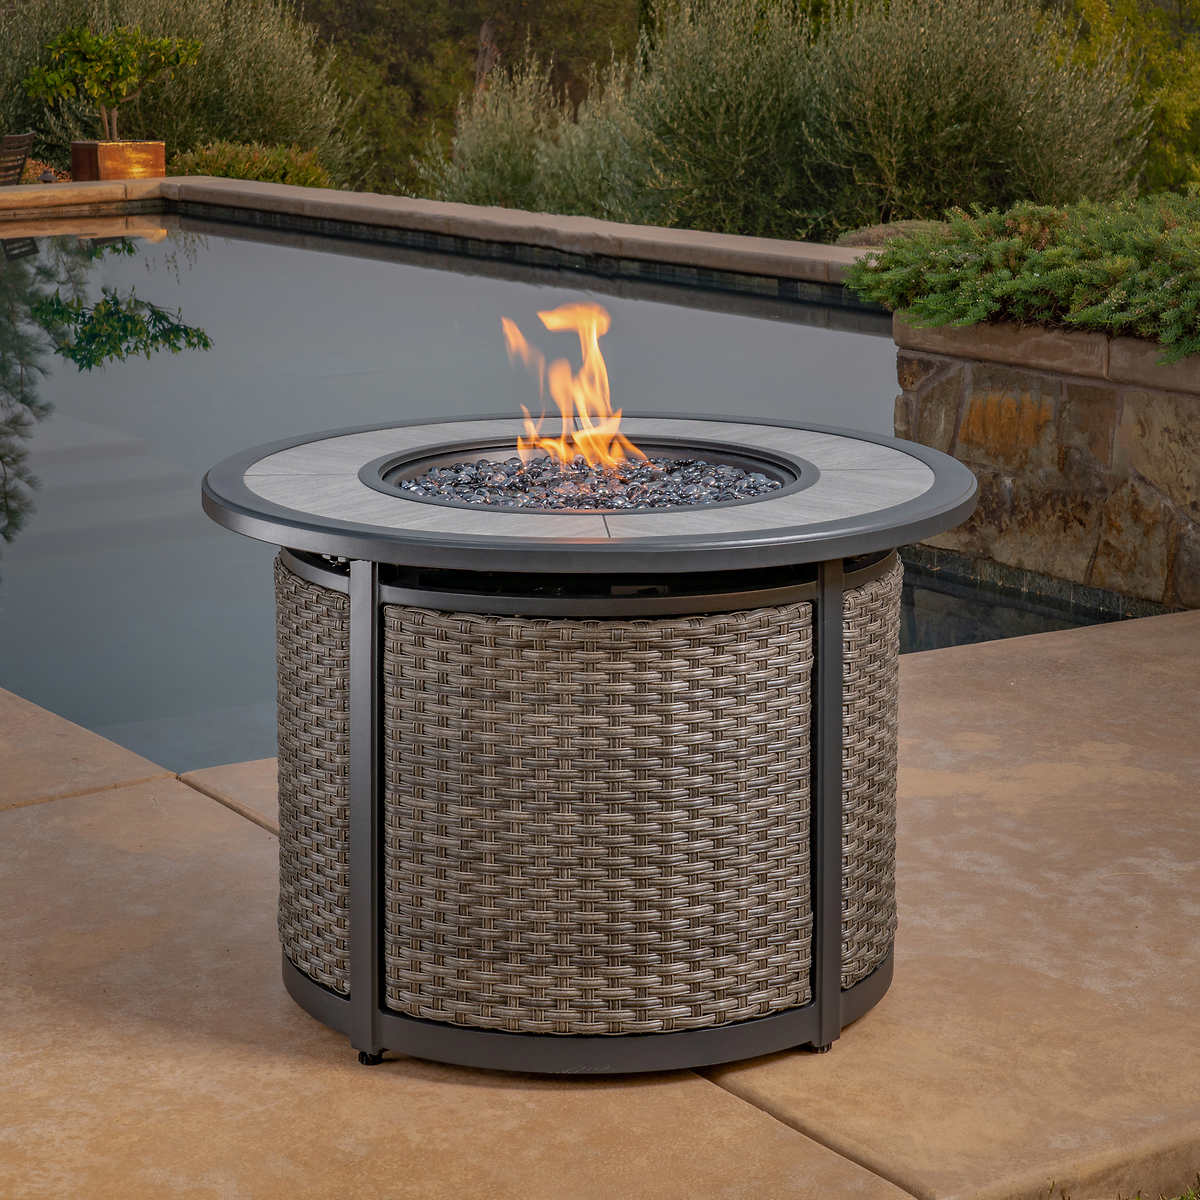 Madison Fire Pit Table Costco, 24 Inch Square Fire Pit Burner Rings In Egypt